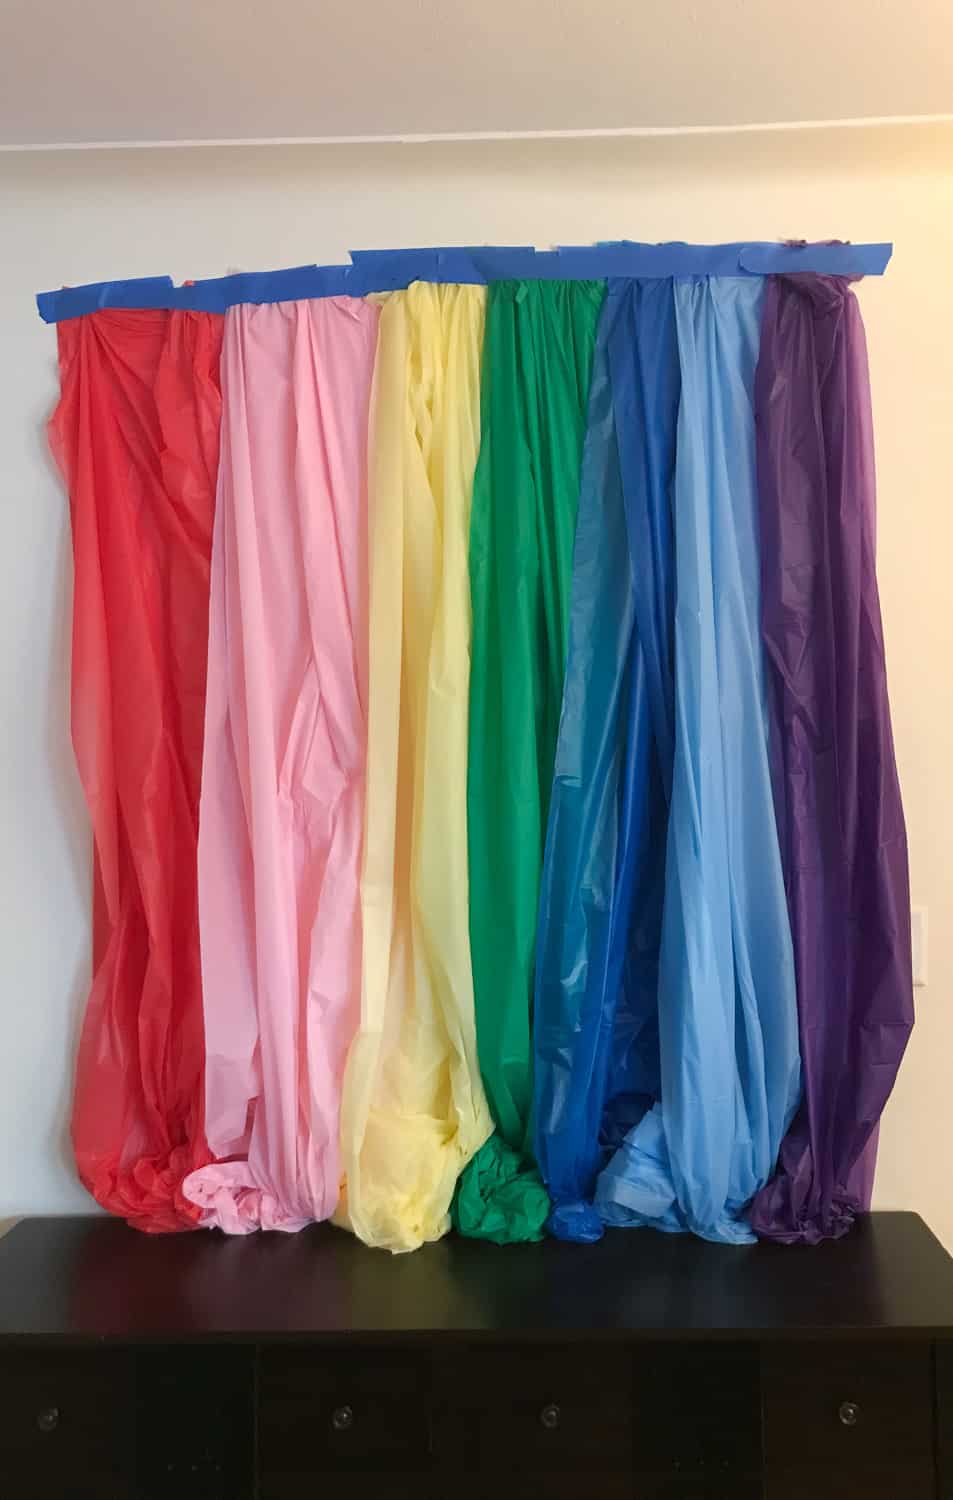 Tape the plastic table clothes to the wall to create a DIY rainbow backdrop for St. Patrick's Day